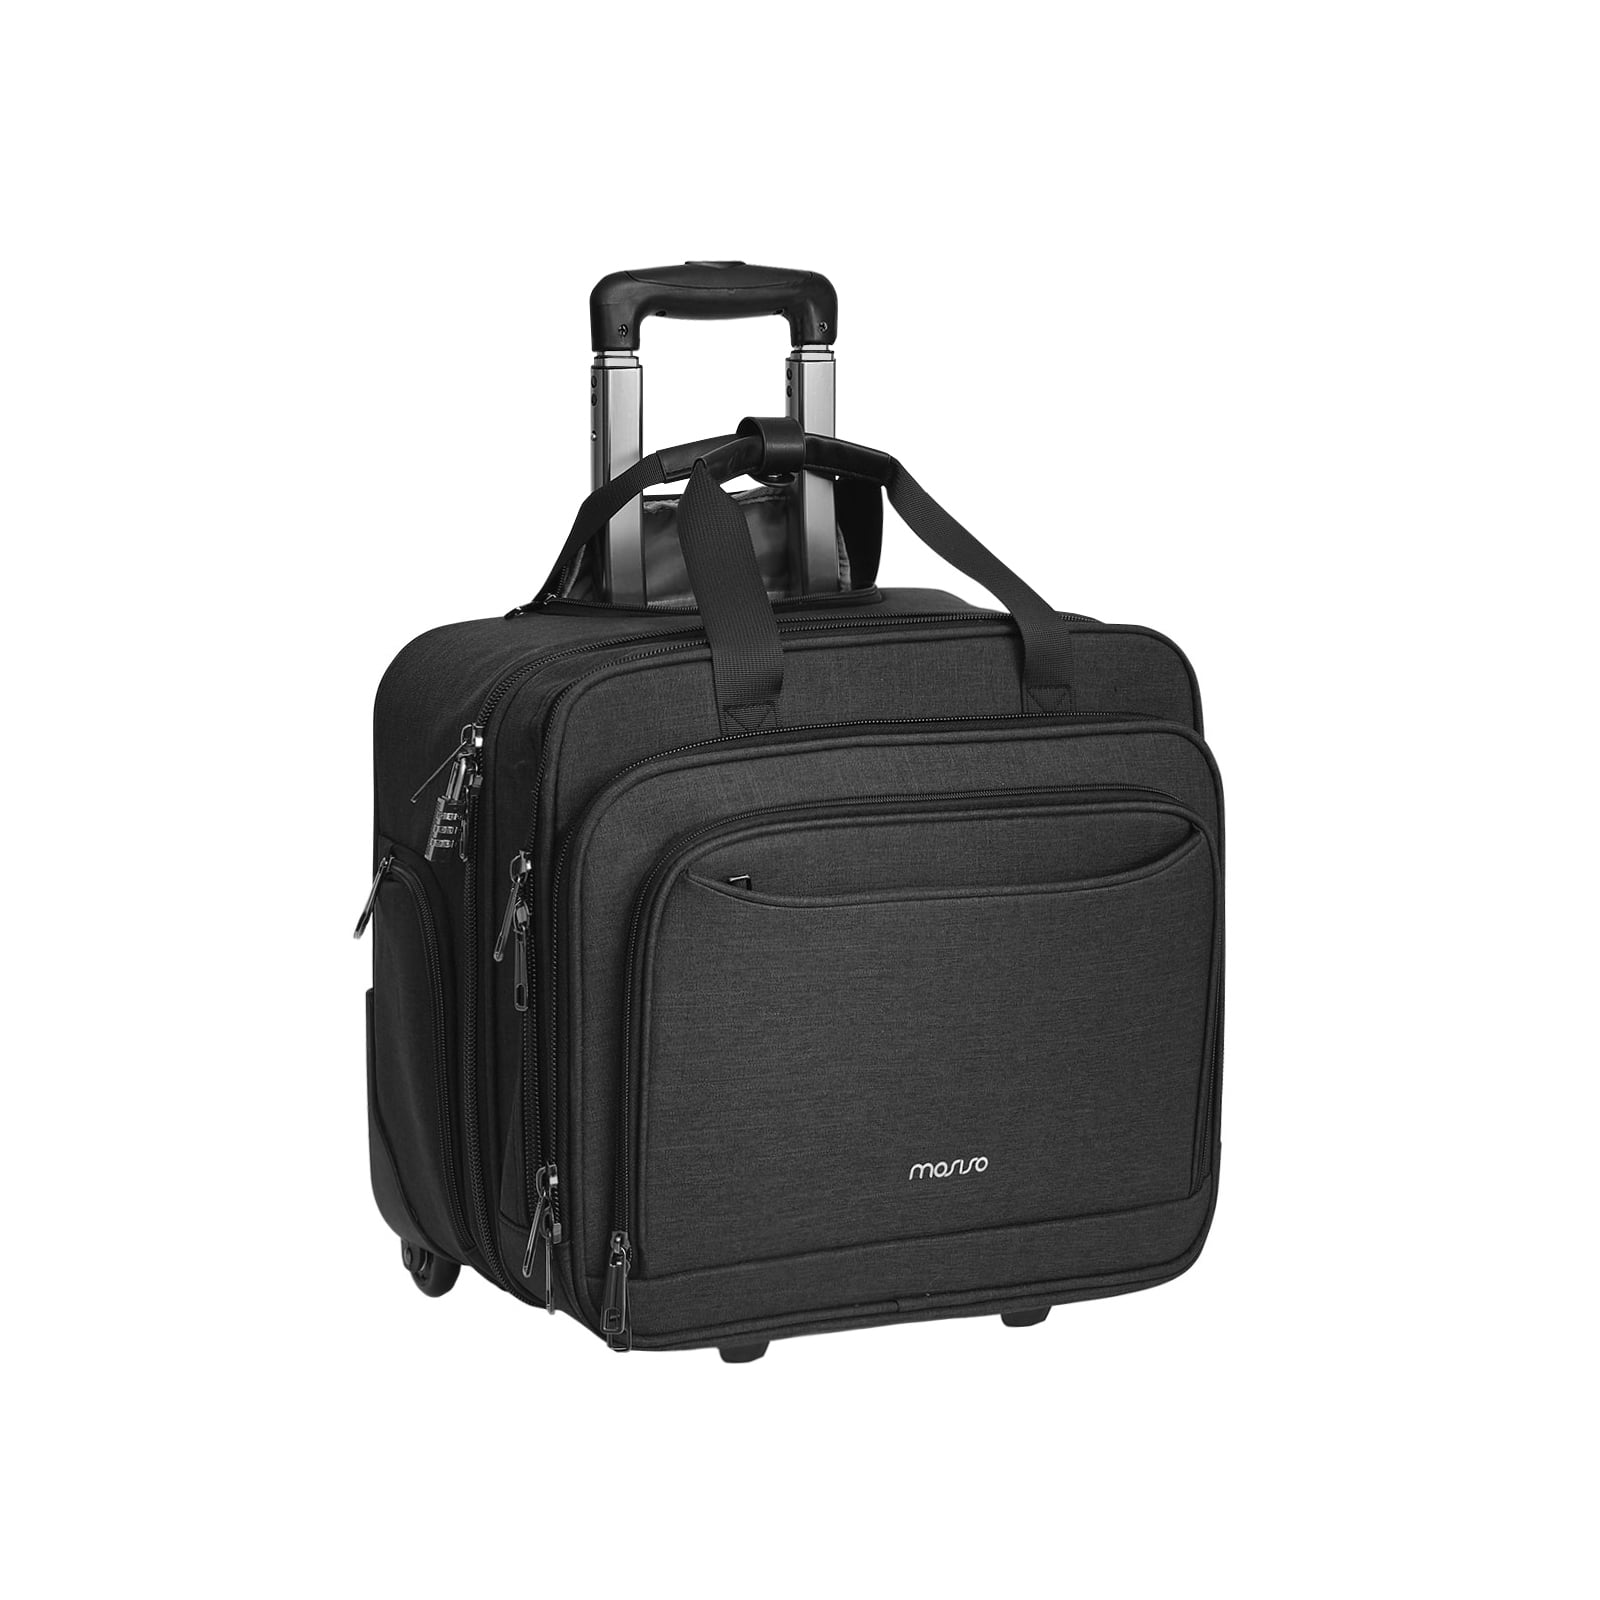 Rolling Laptop Bag Briefcase Fits Up To 17.3 Inch Wheeled Bag Overnight  Roller | eBay